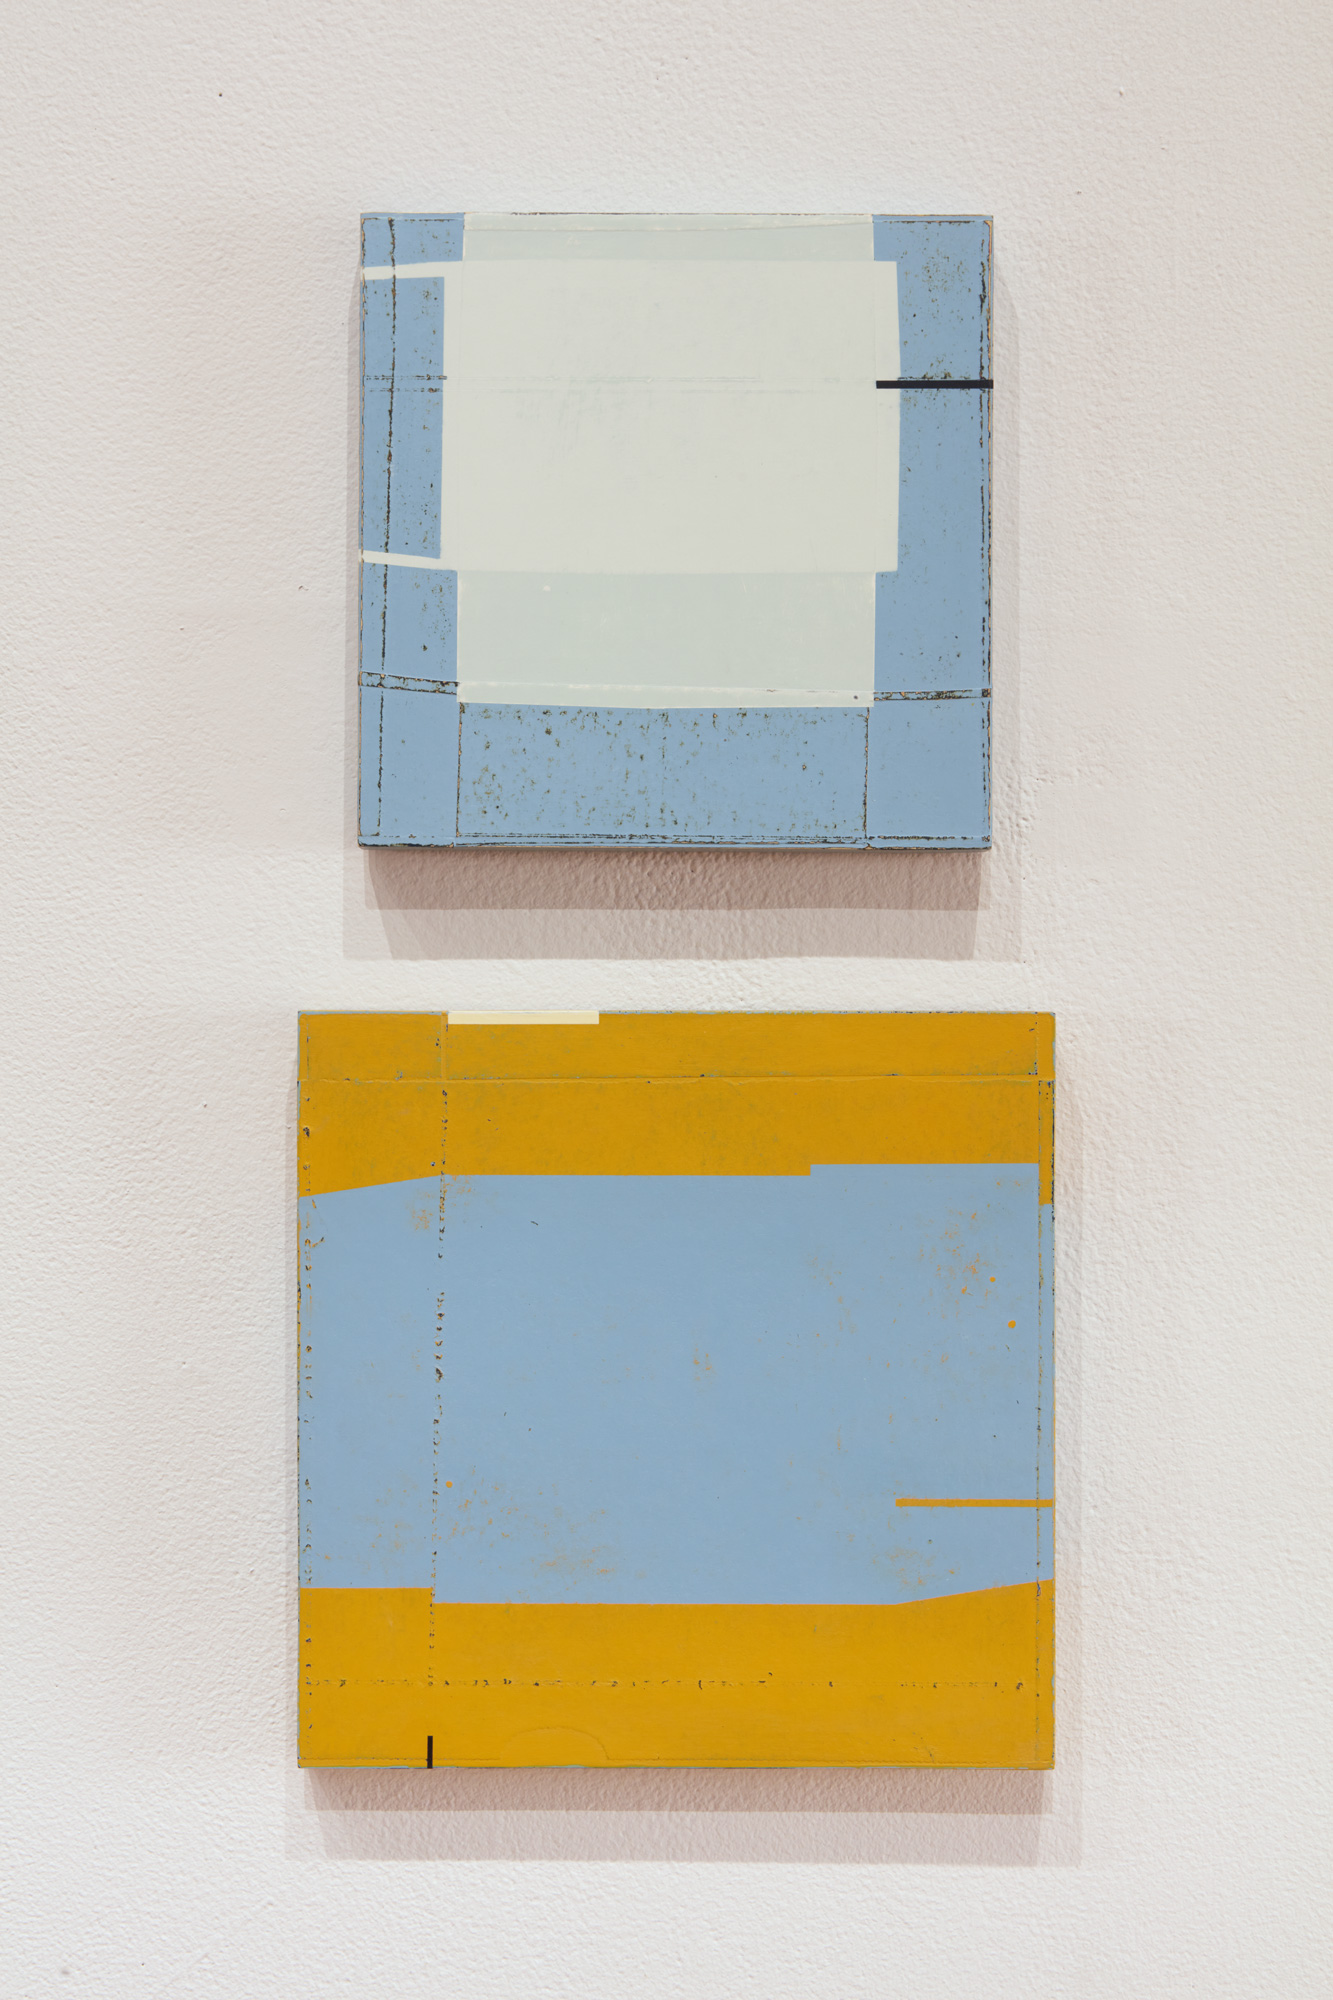 Babette Herschberger, Collage Painting #38, 2018. acrylic and paper collage on wood panel. 10 x 10 x 1 in. Collage Painting #41, 2018. acrylic and paper collage on wood panel. 12 x 12 x 1 in. Courtesy of the artist. Installation view of Skyway 20/21 exhibition at USF Contemporary Art Museum. Photo: Will Lytch.